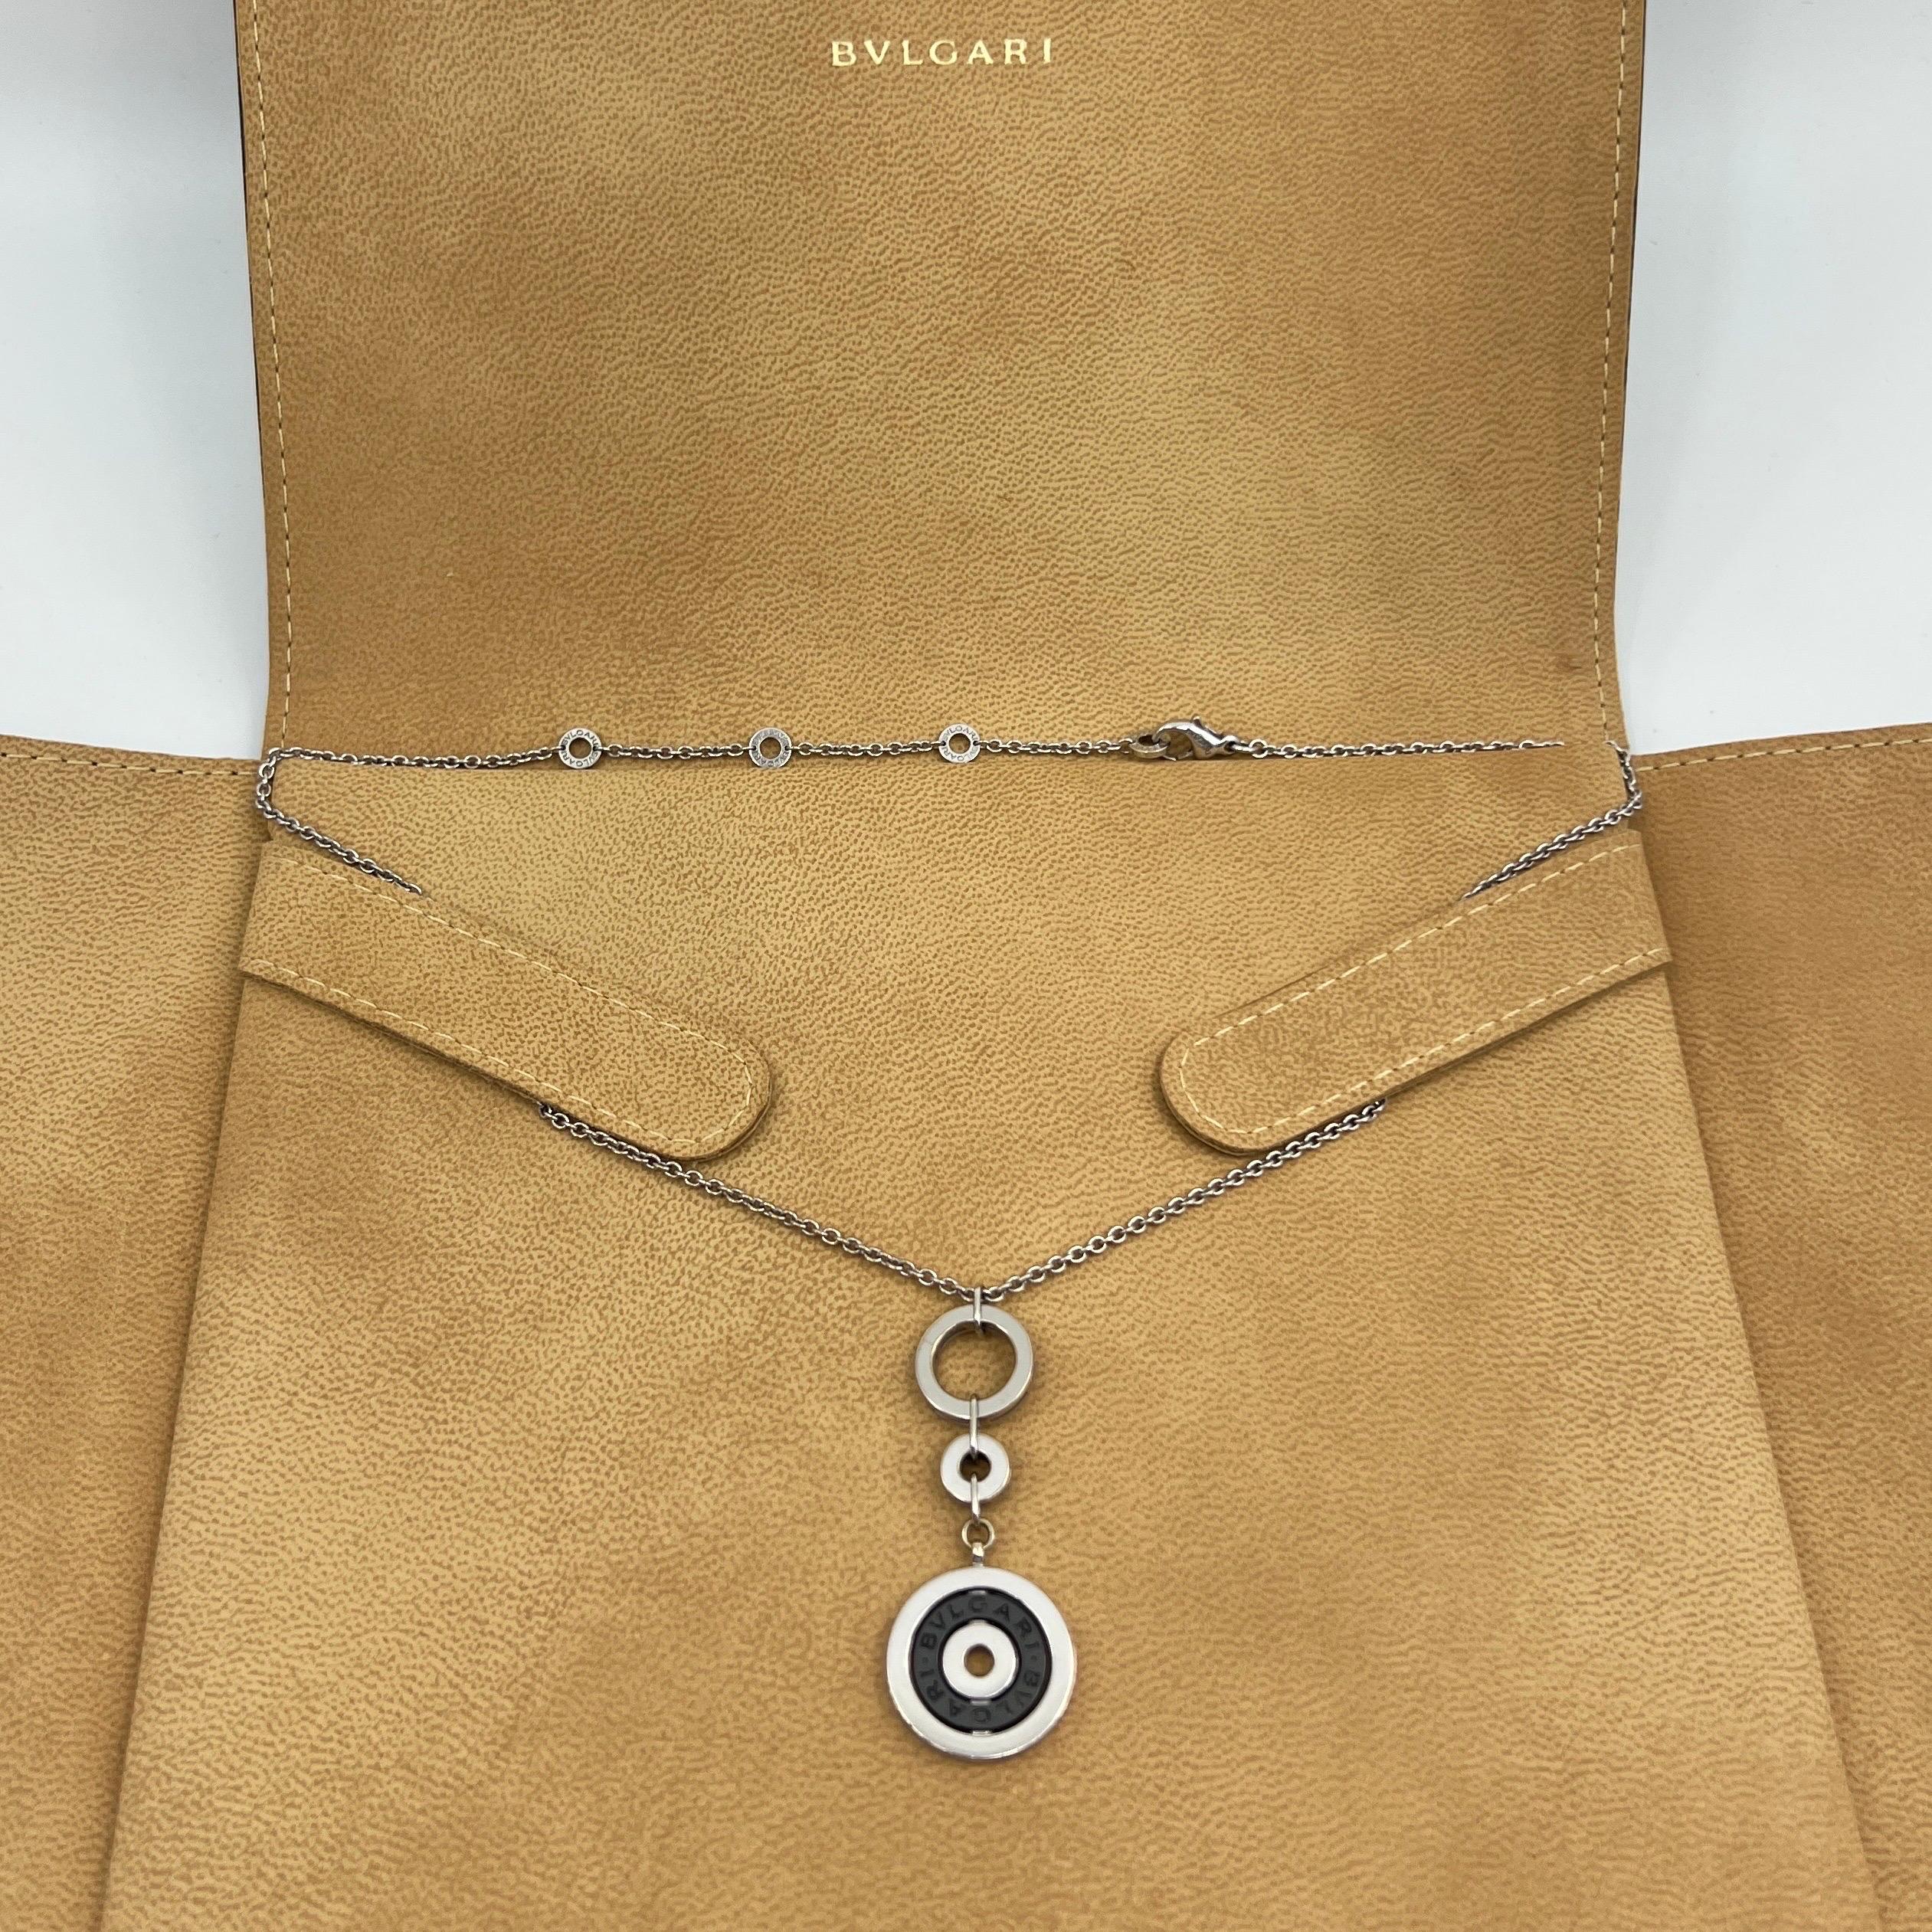 Bvlgari Astrale Cerchi 18k White Gold & Black Ceramic Disc Circle Necklace.

This beautiful Bvlgari necklace features a dangling black ceramic disc amongst a series of white gold discs, hanging on an 18k white gold link chain.

A rare vintage piece.